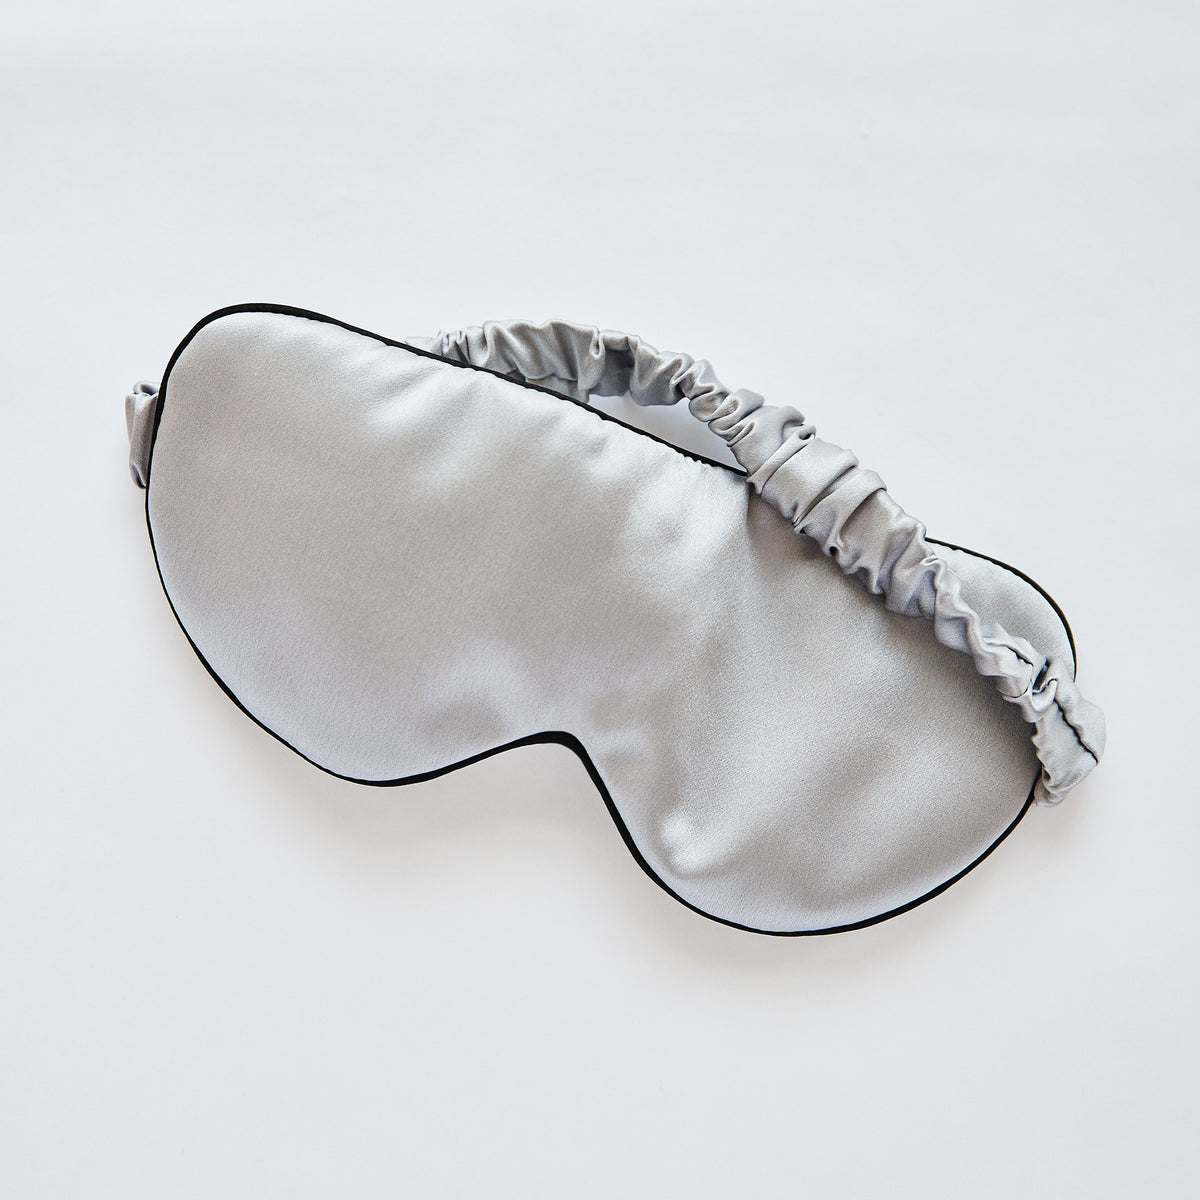 Silk Sleep Mask by Scandia Home  100% Mulberry Silk, one size, elastic band